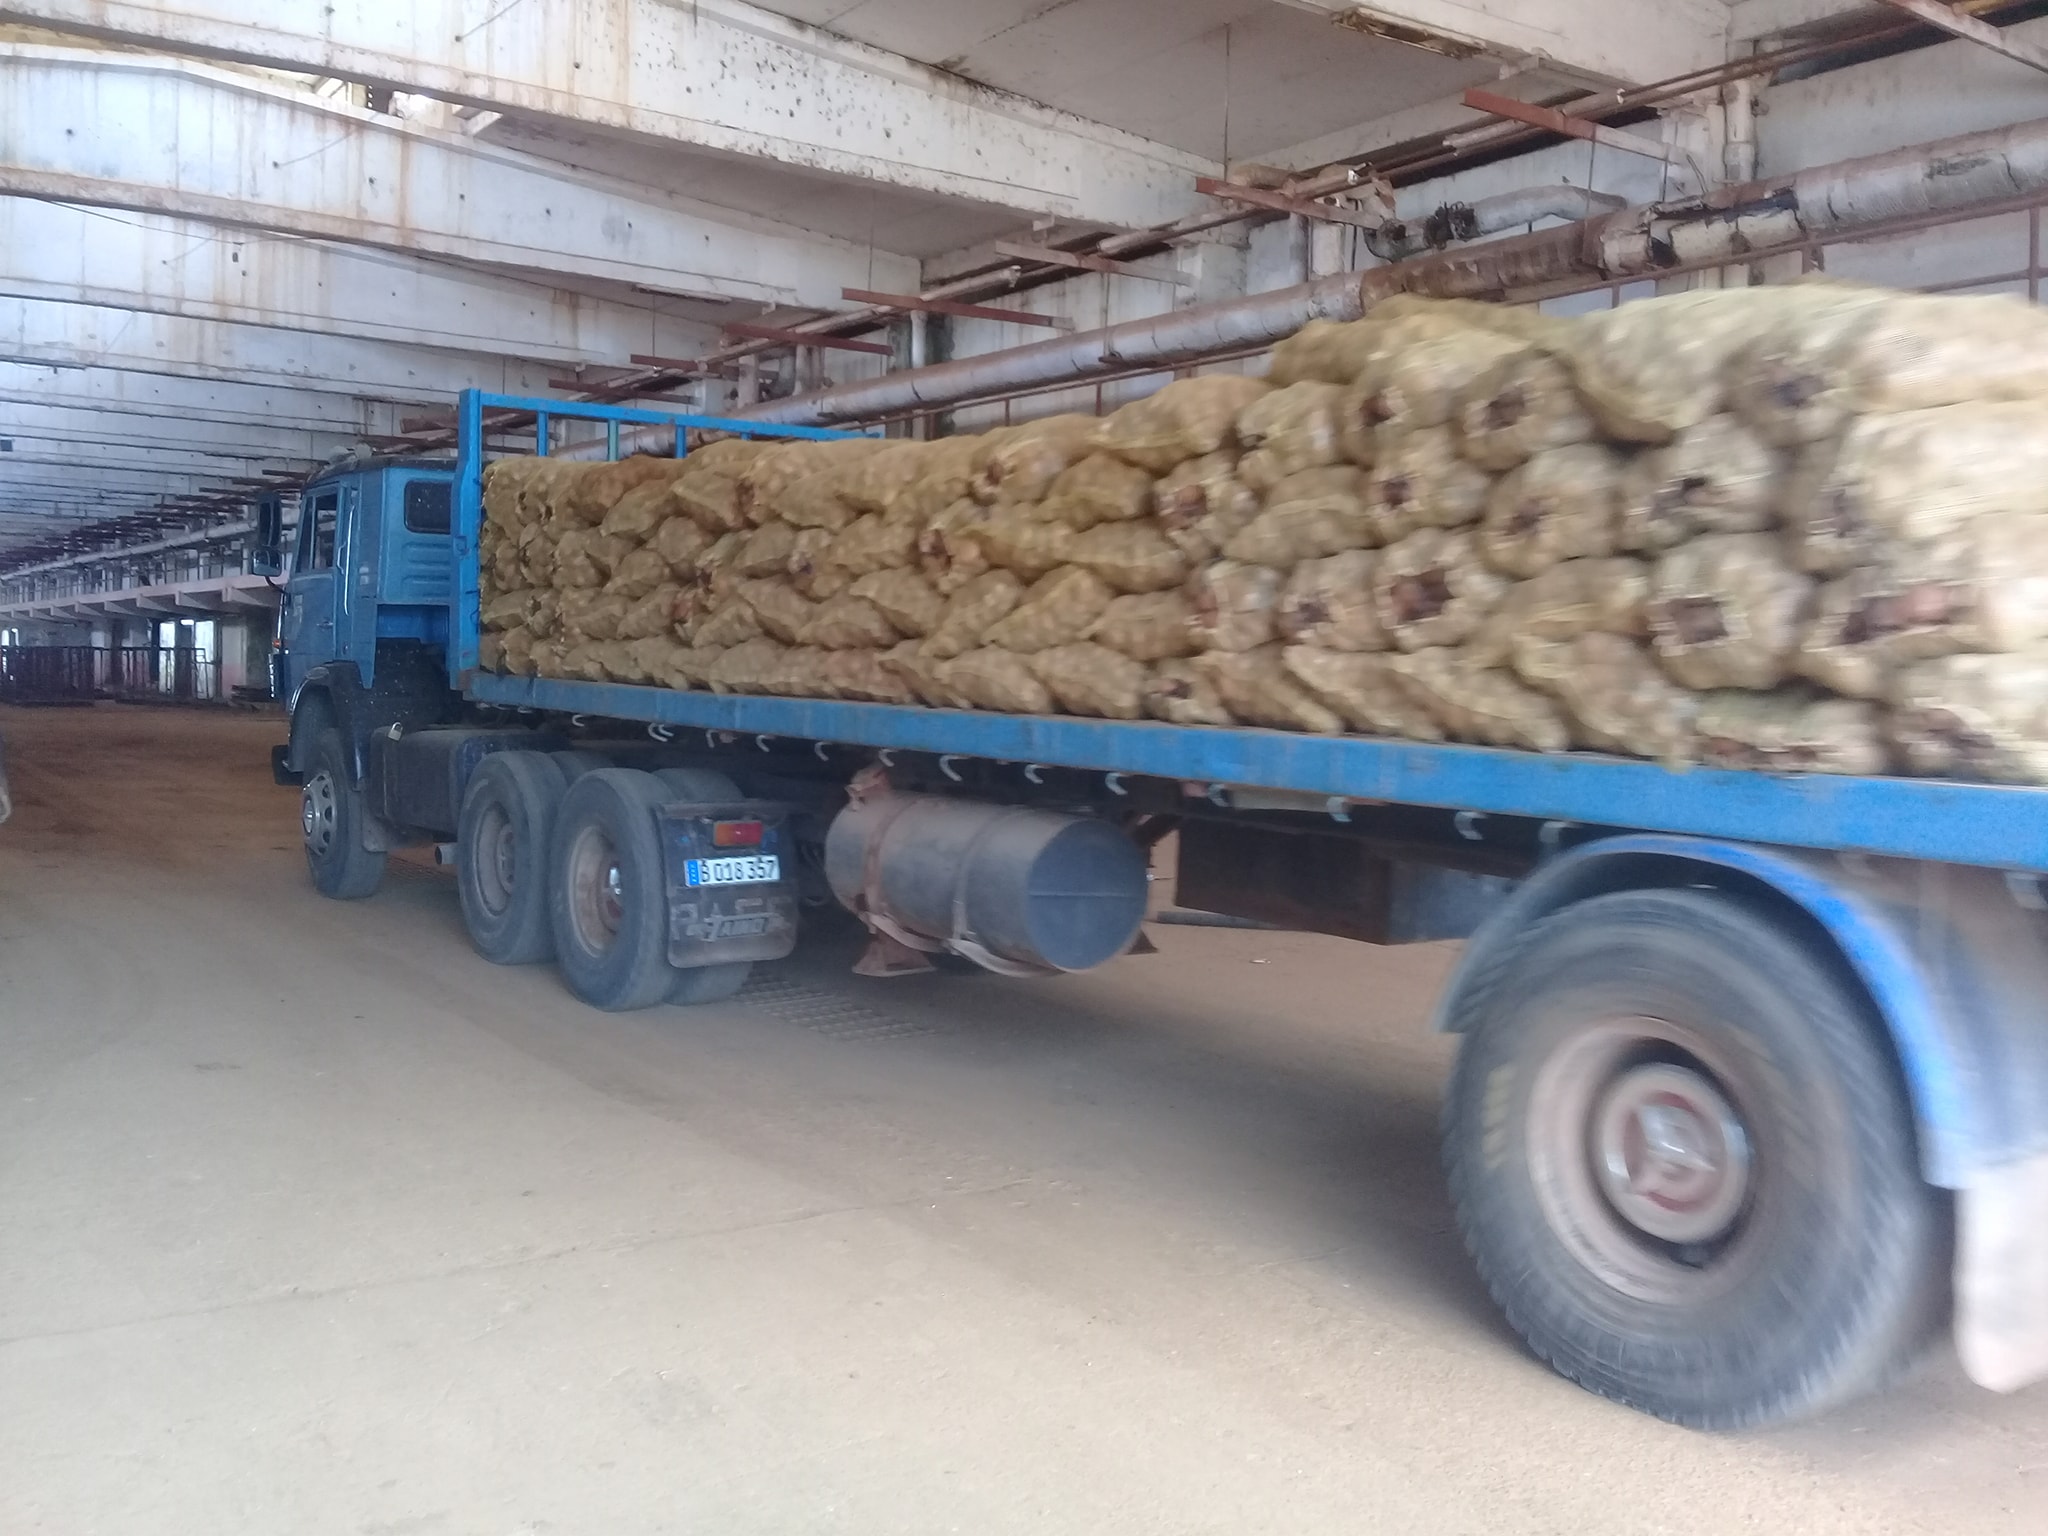 Mayabeque cold storage plant ready to conservate potatoes in the current cold season.